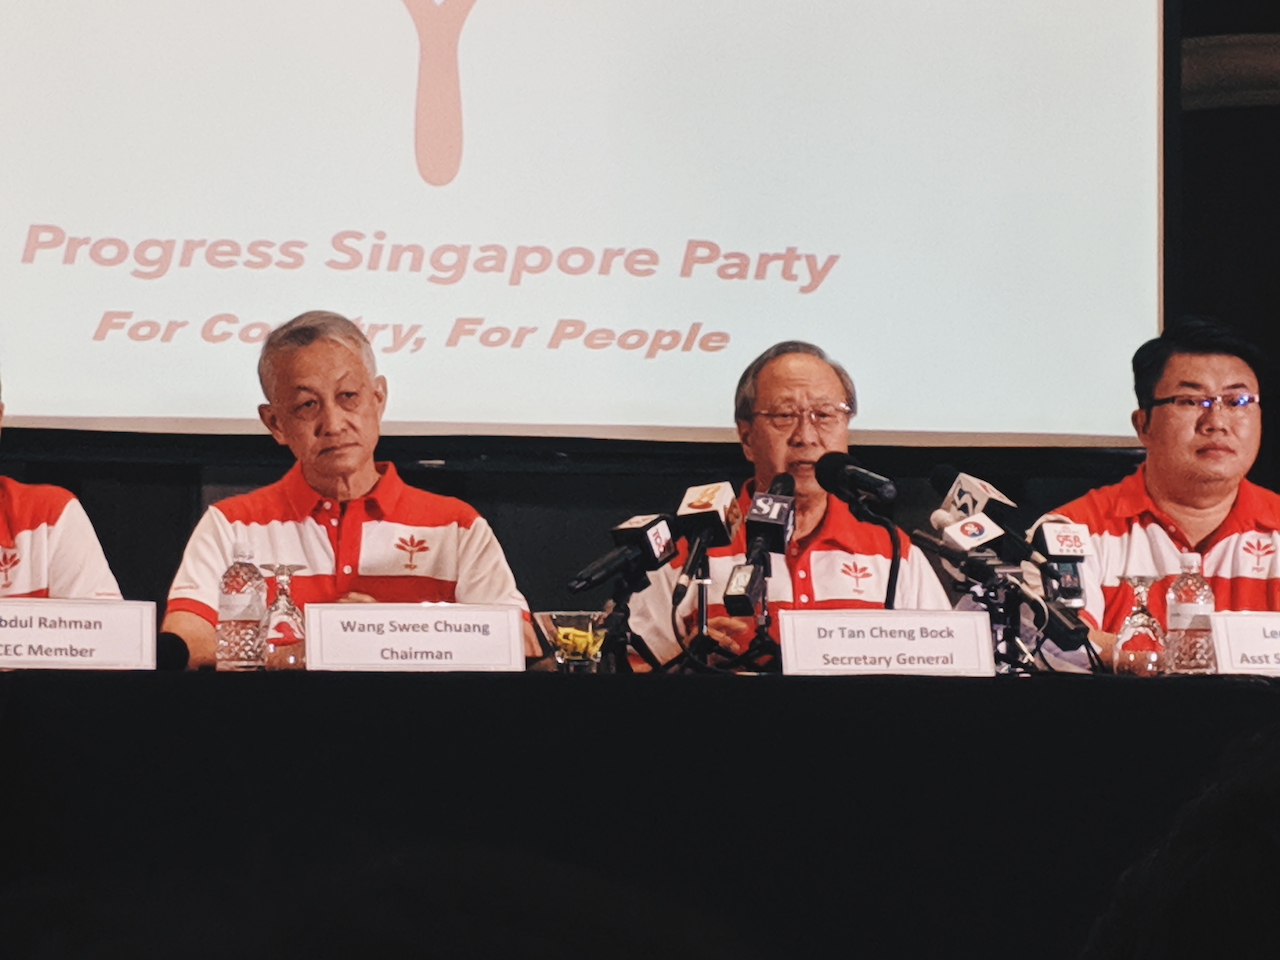 The Progress Singapore Party’s Vague, Feel-Good Statements Will Not Win Singaporeans Over